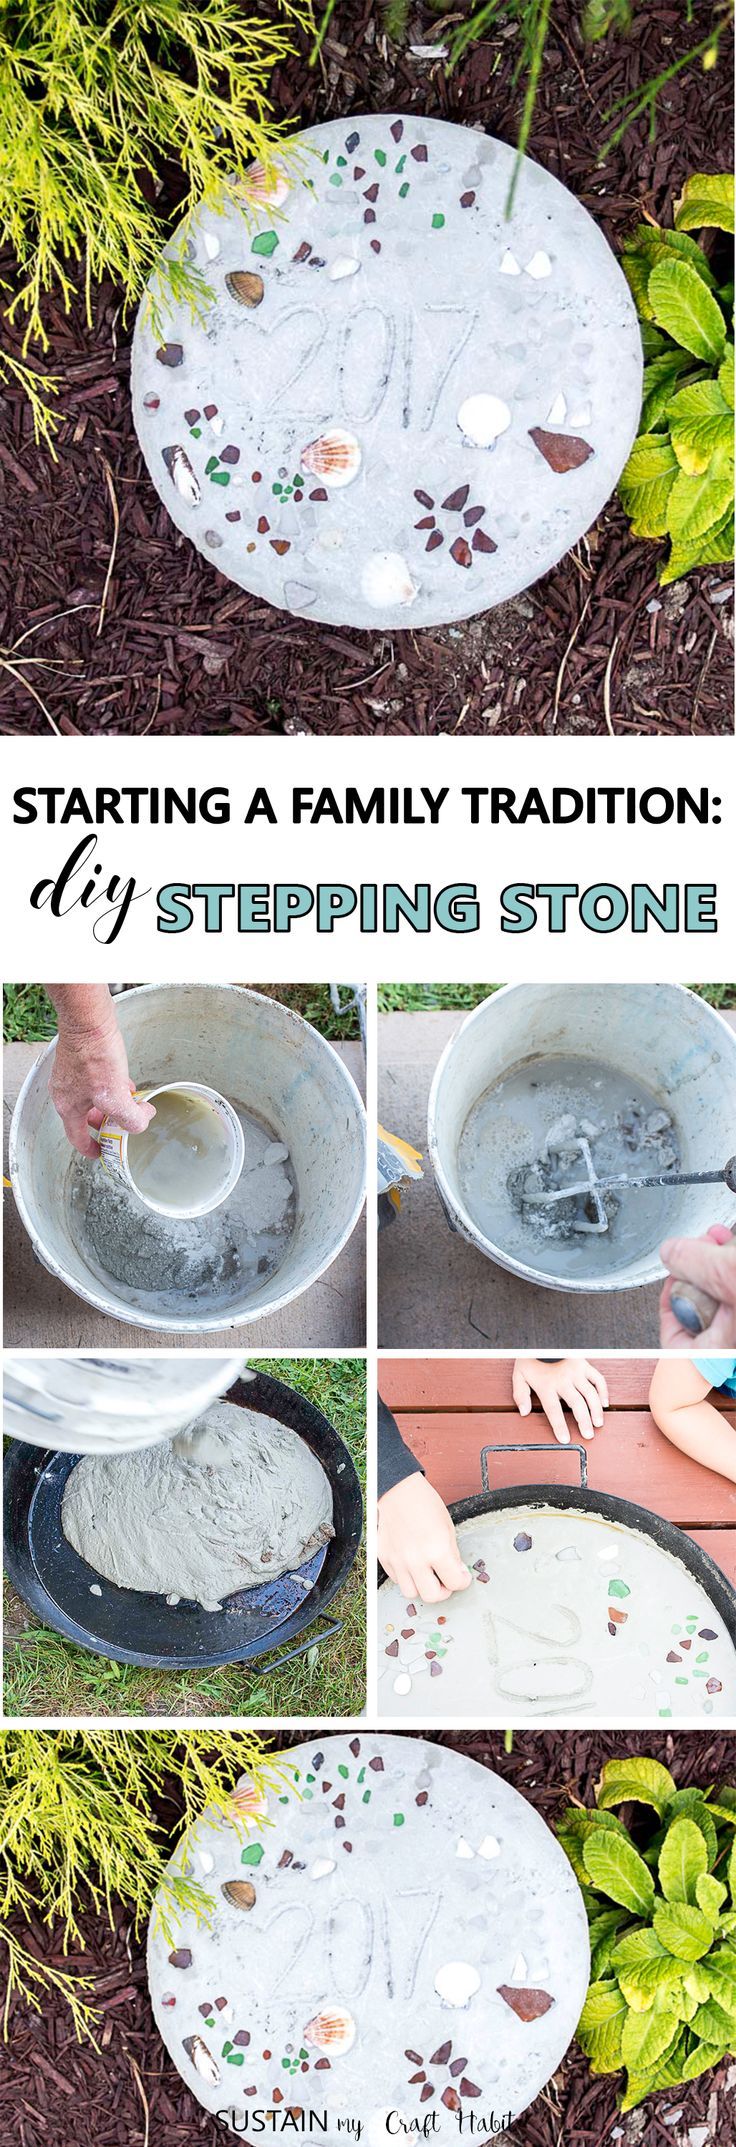 DIY Stepping Stones: Starting a Family Tradition